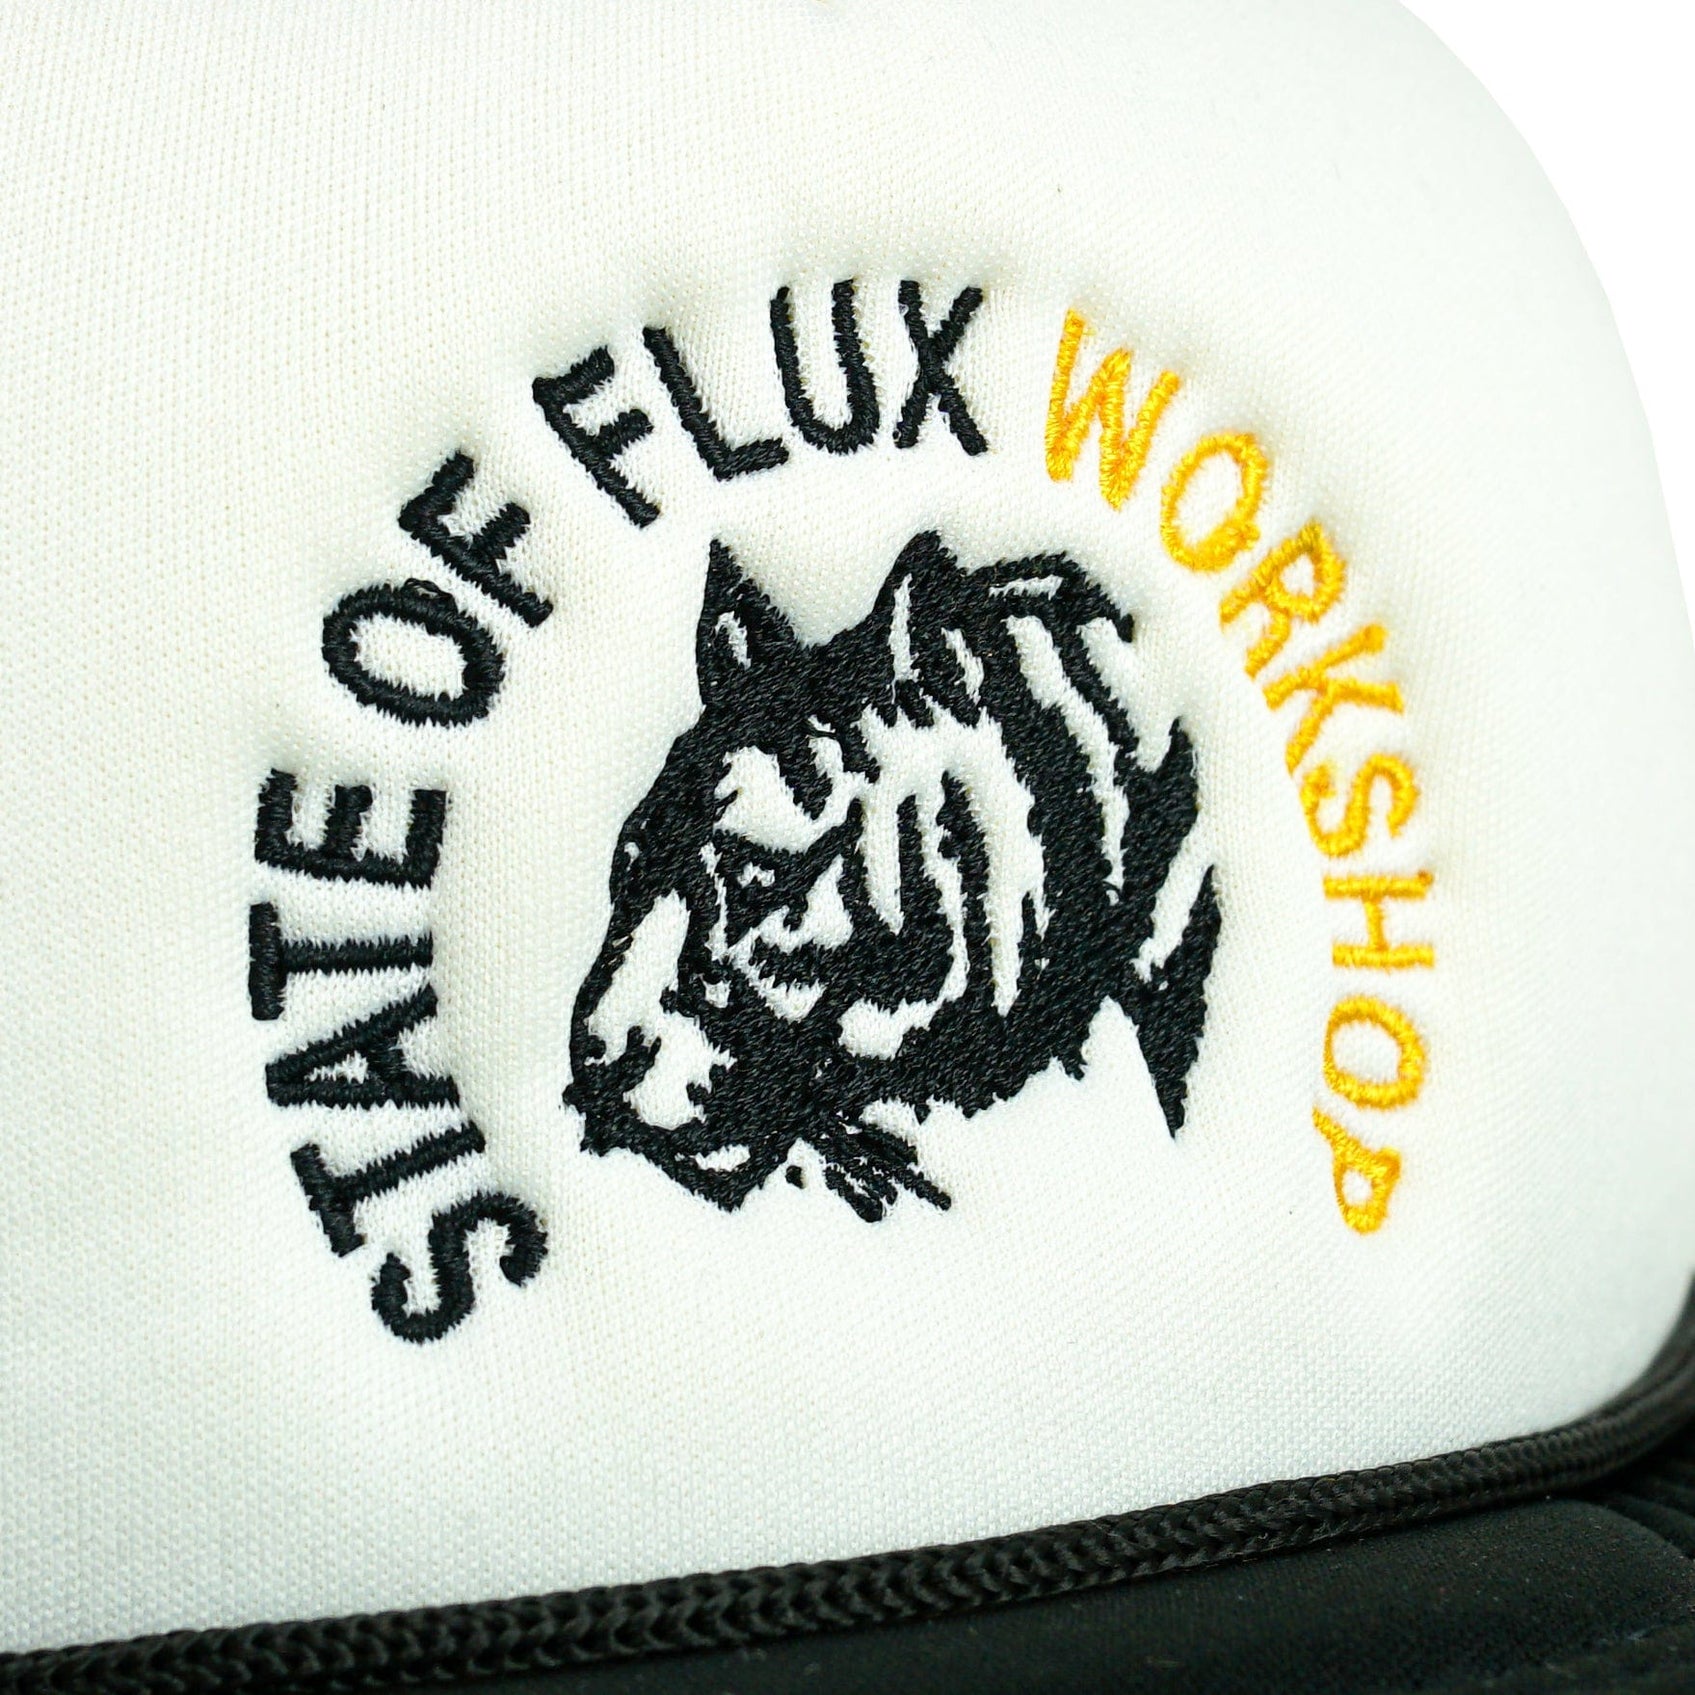 The Workshop Trucker Hat in black and white